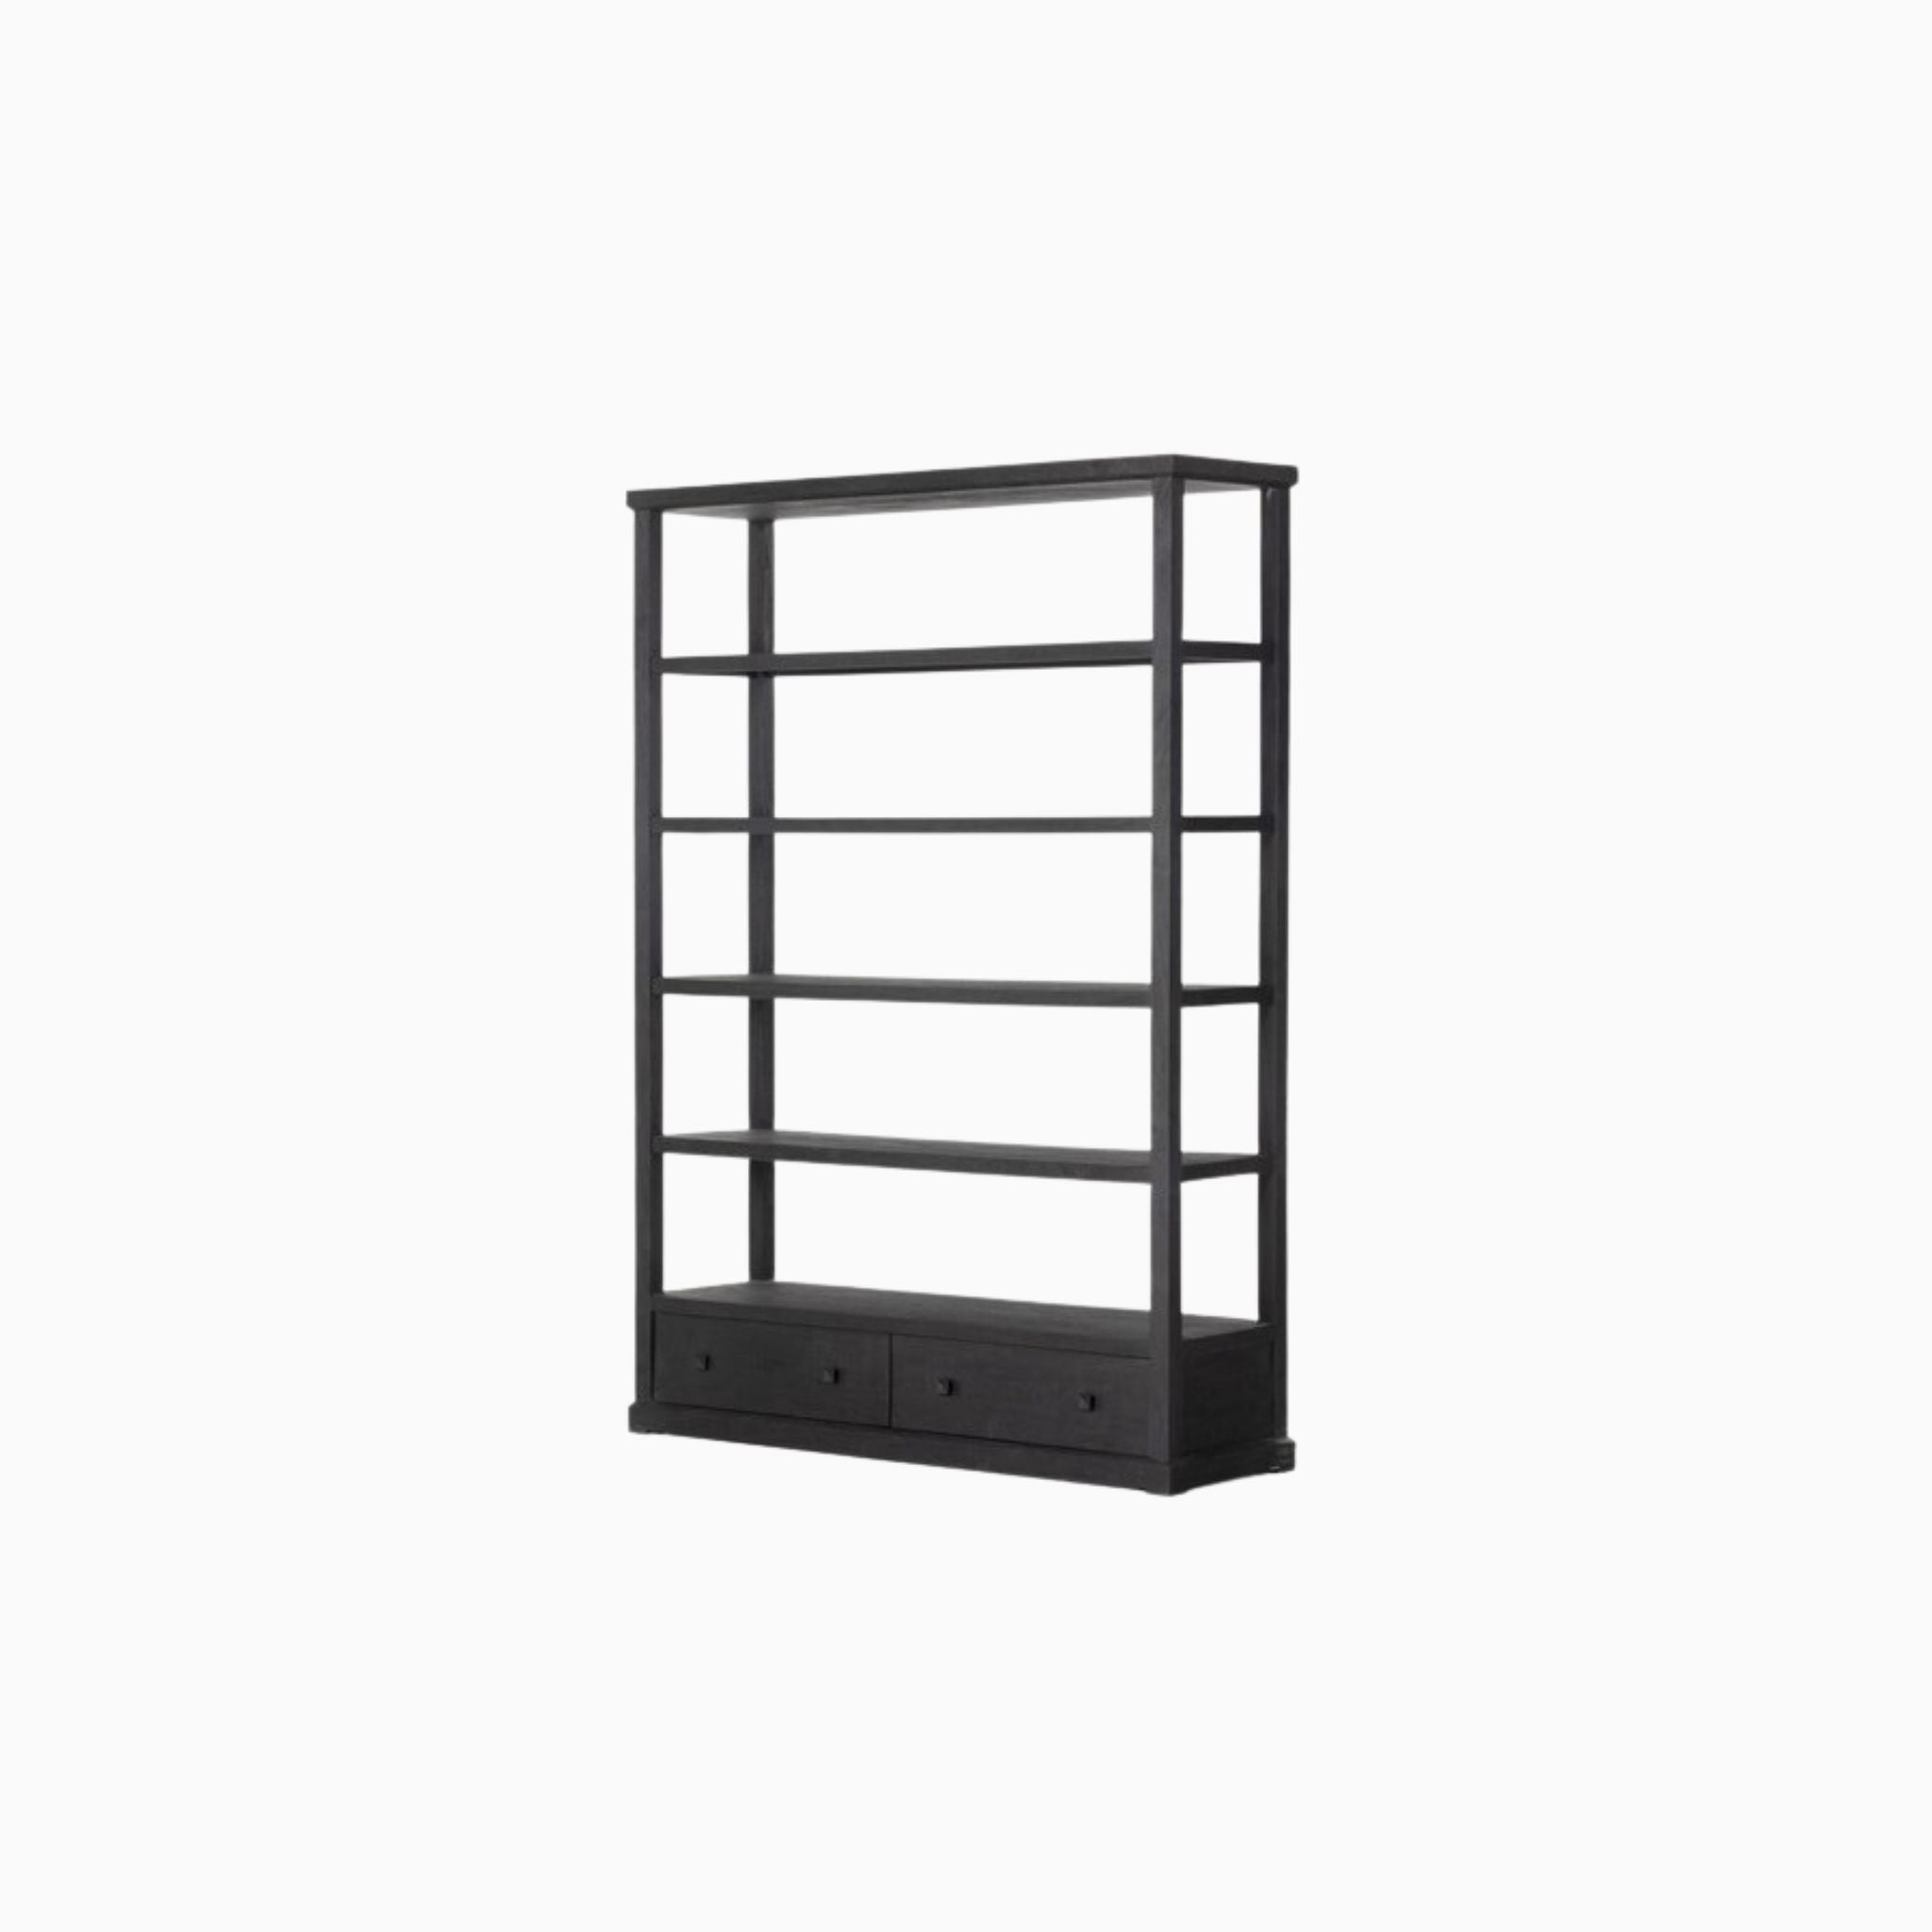 WOODMORE BOOKCASE - Simply Elevated Home Furnishings 